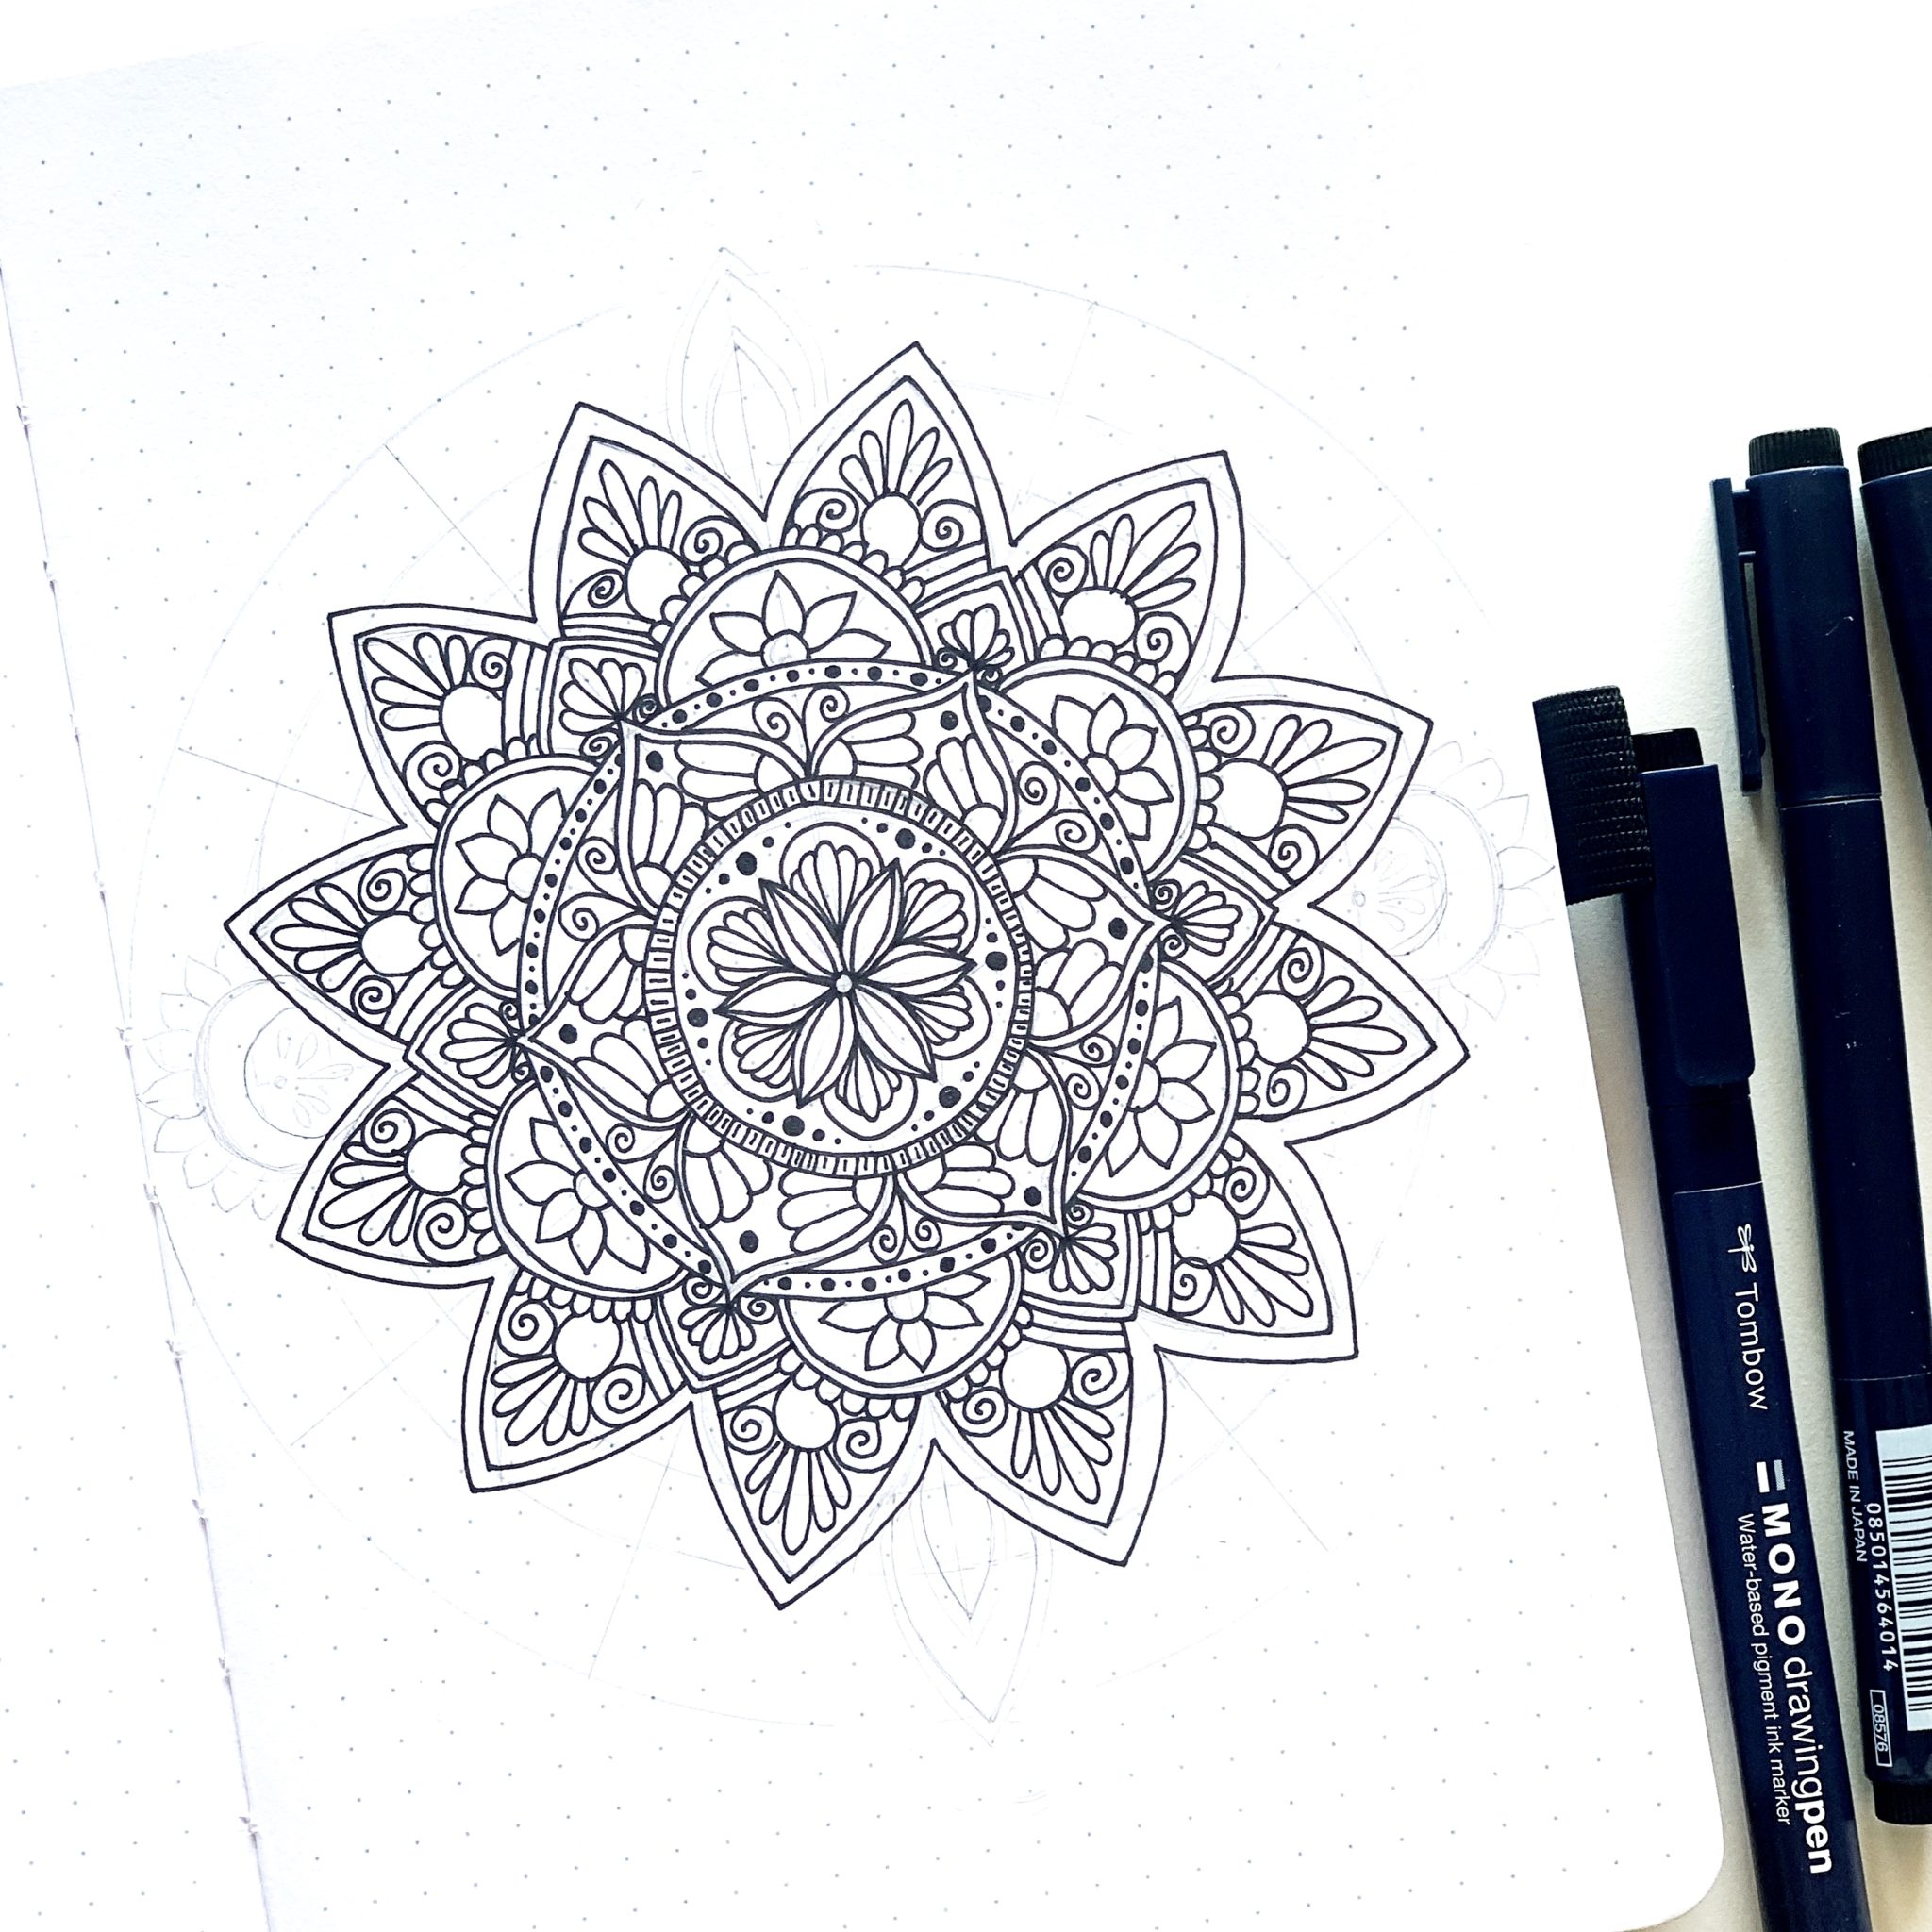 How To Draw Easy Mandala For Beginners, HOW TO Make the SIMPLE MANDALA